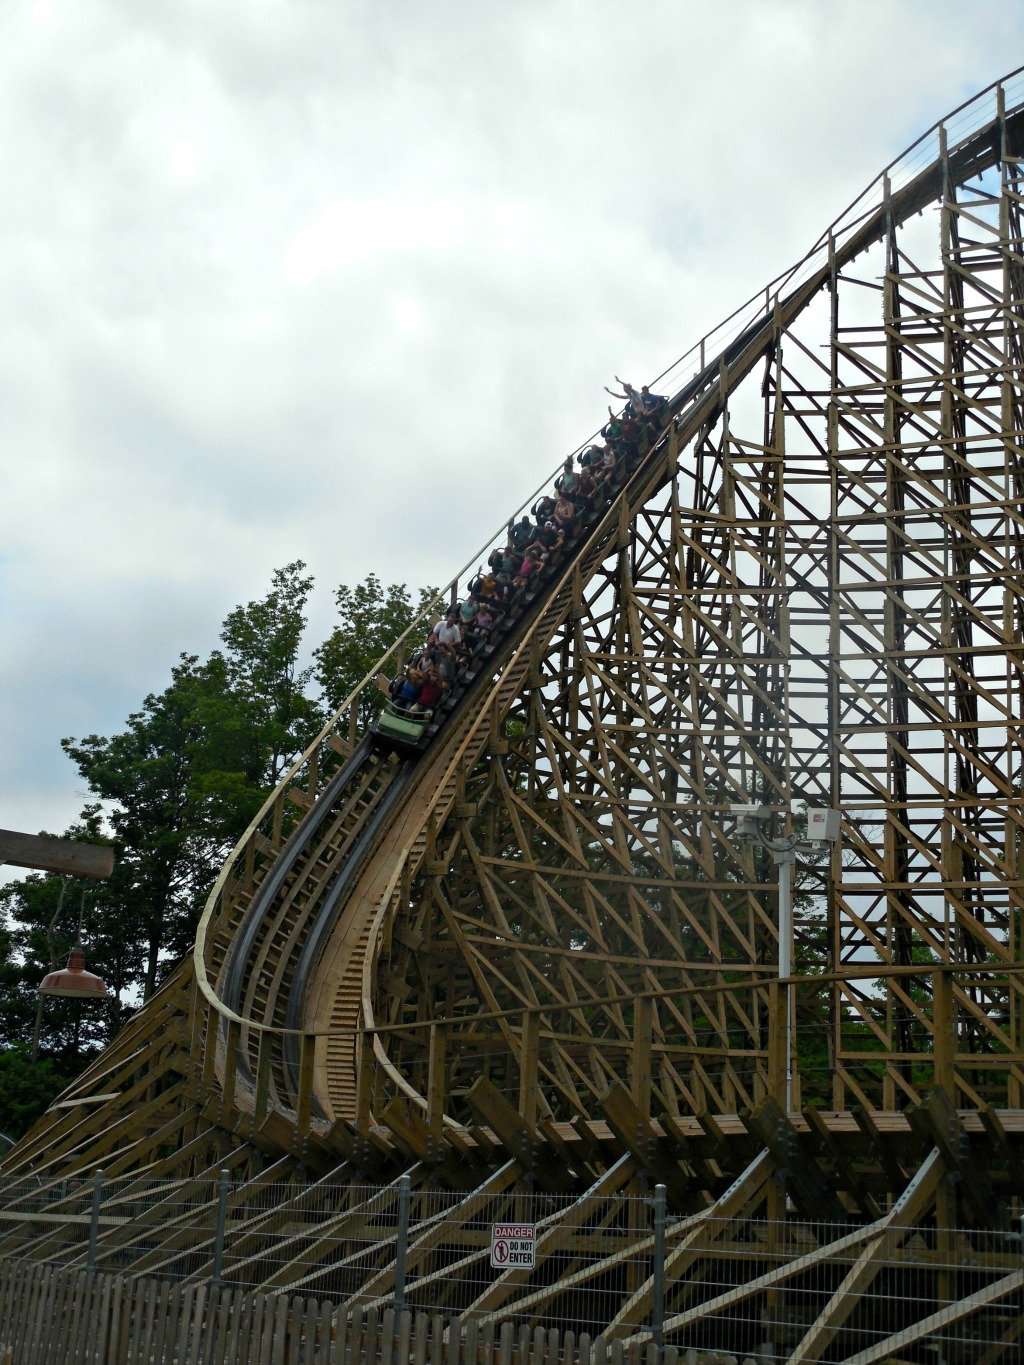 Visit Kings Island to Ride Mystic Timbers